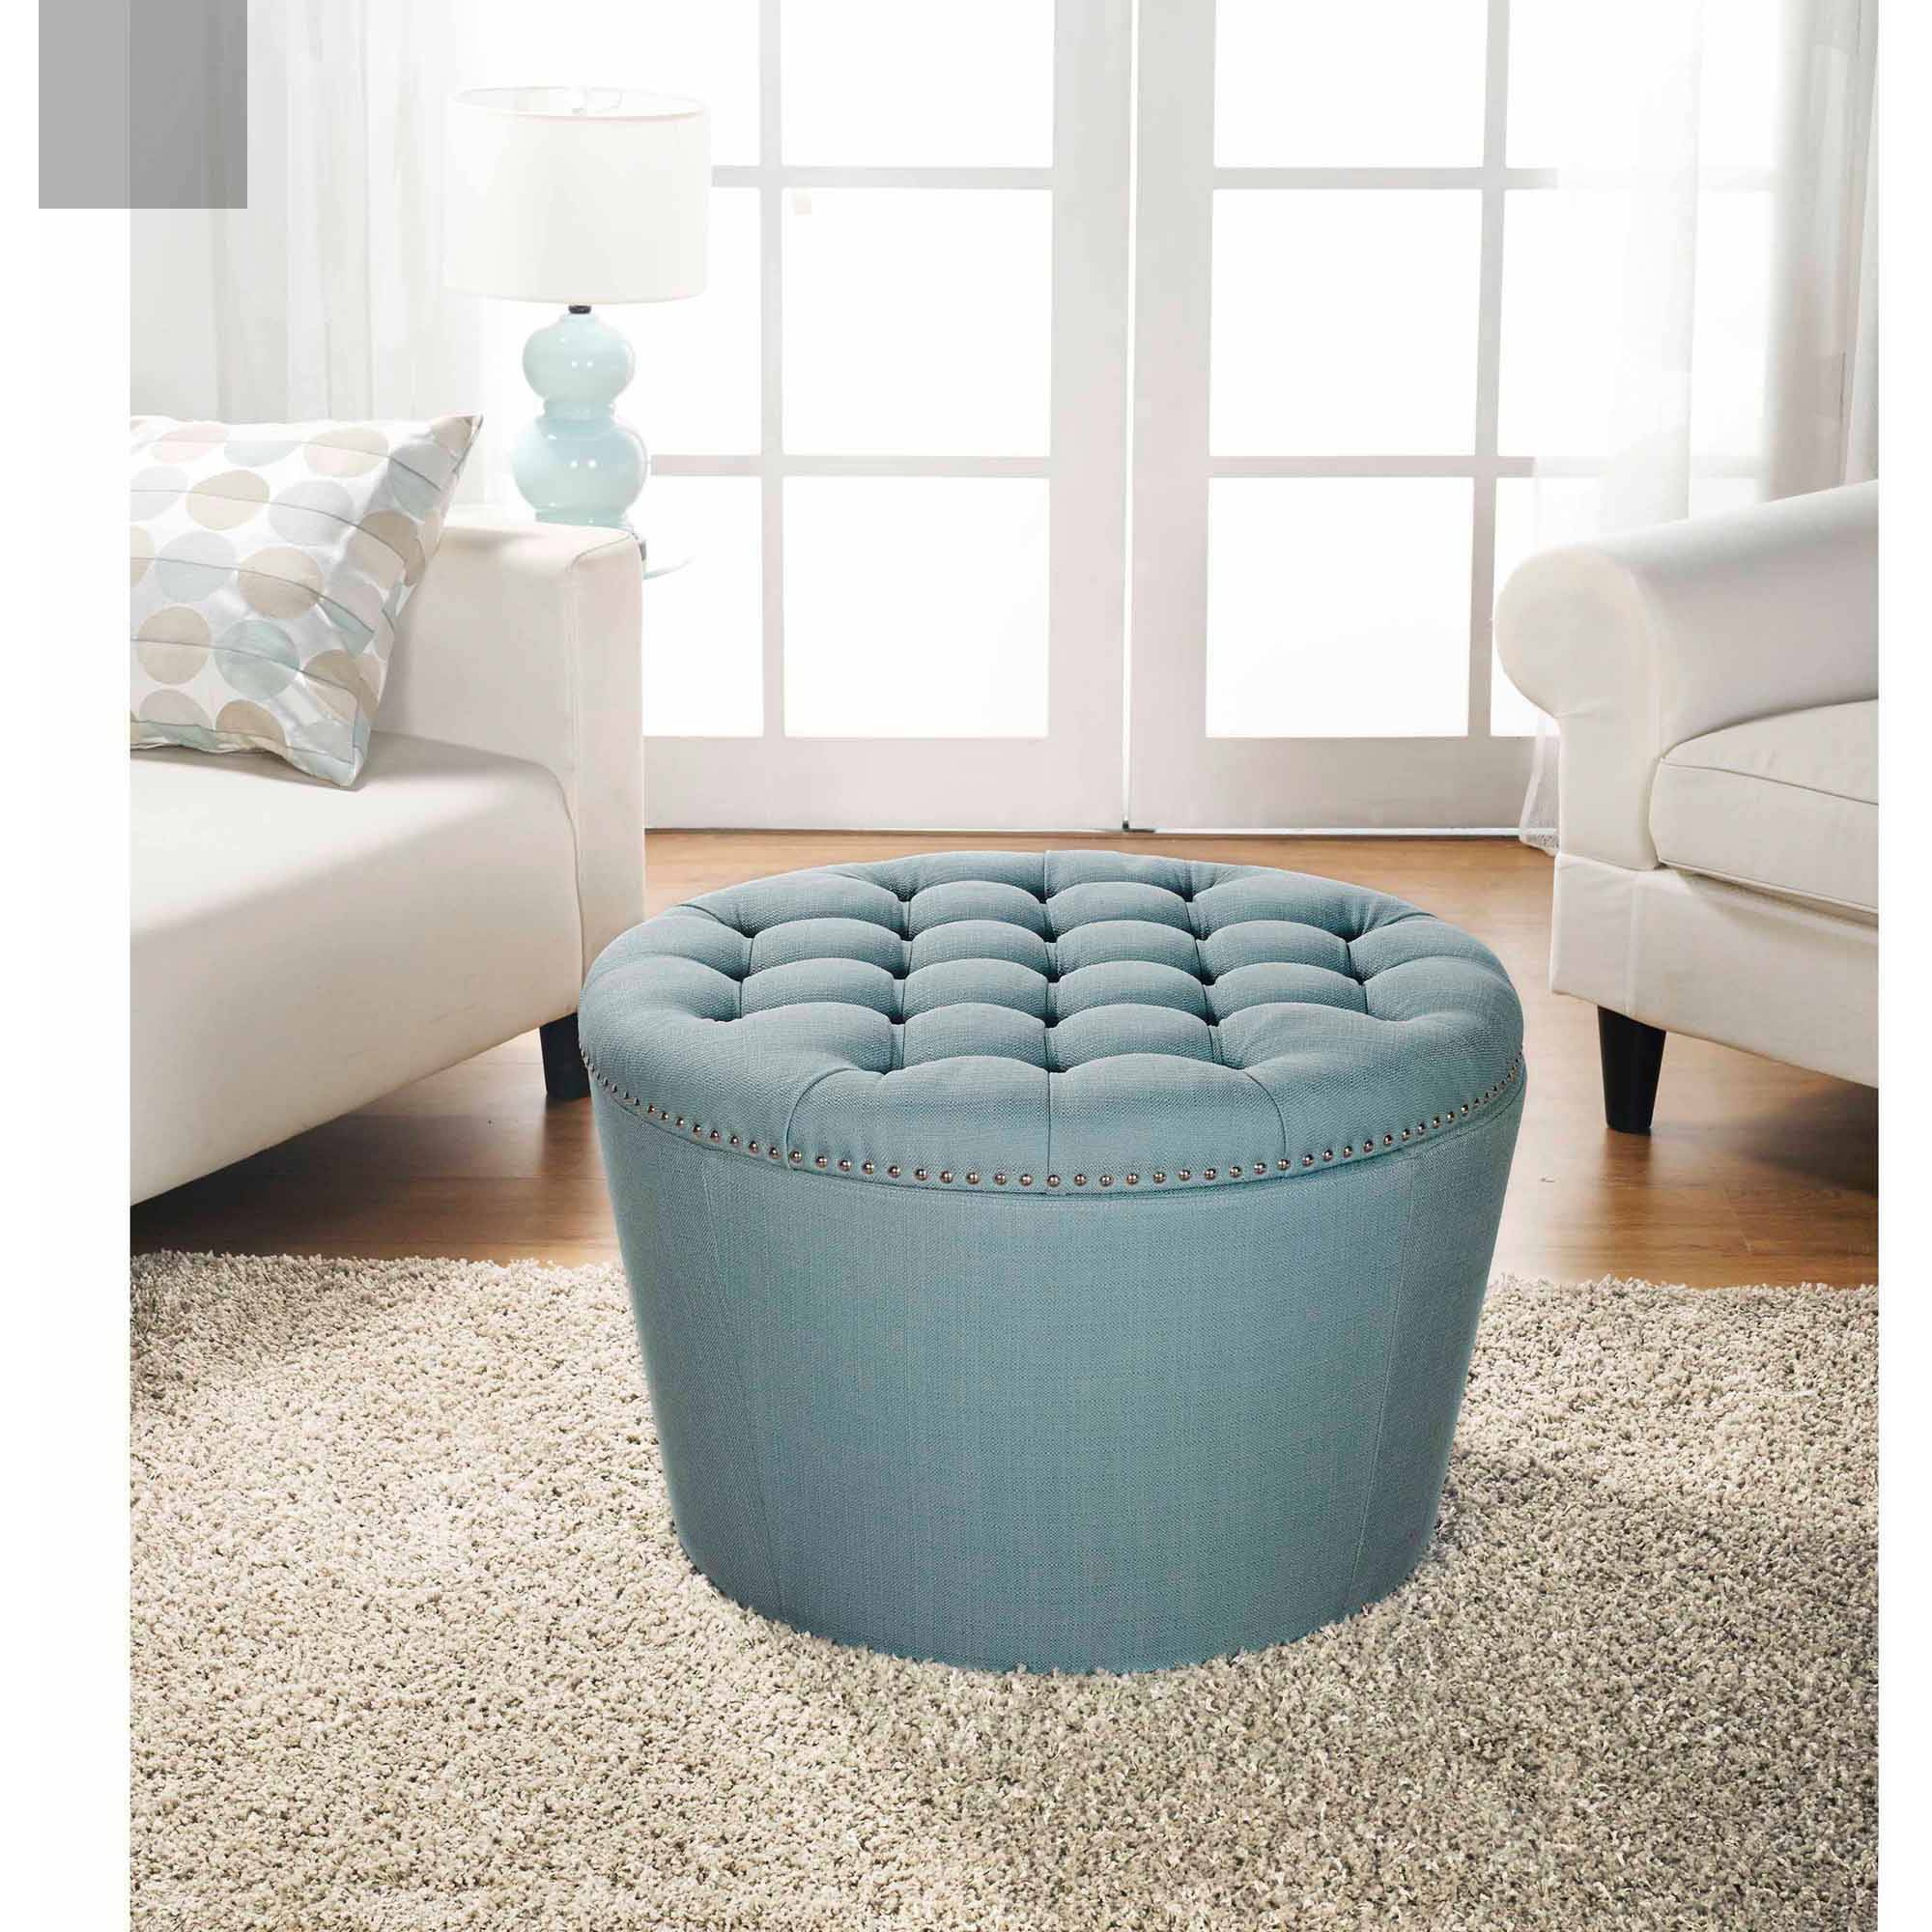 Better Homes & Gardens Round Tufted Storage Ottoman with Nailheads, Teal - image 1 of 4